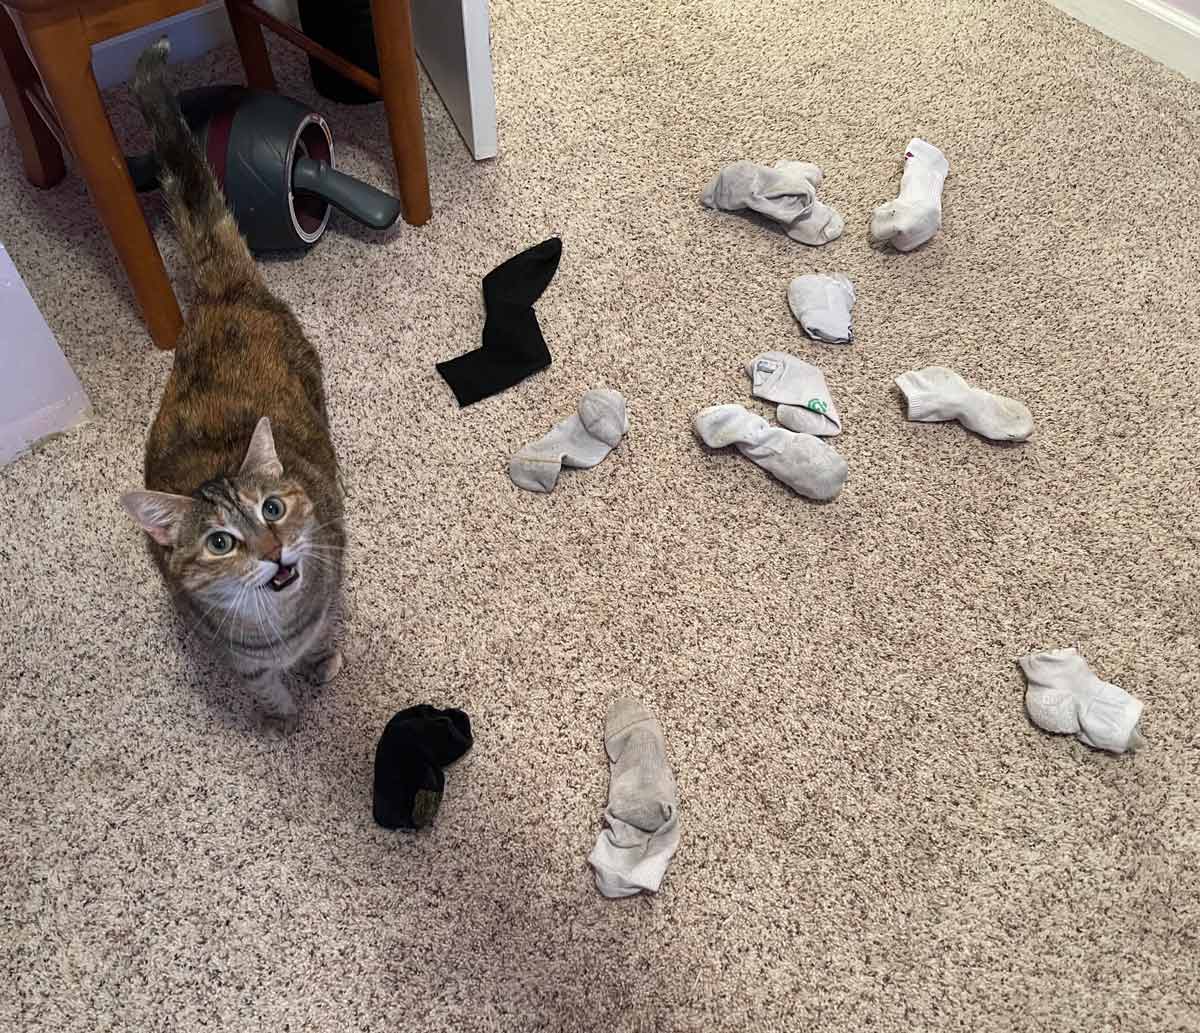 This is my boyfriends office, he works from home. Here are all of the socks she brought up from the basement to the third floor for him today